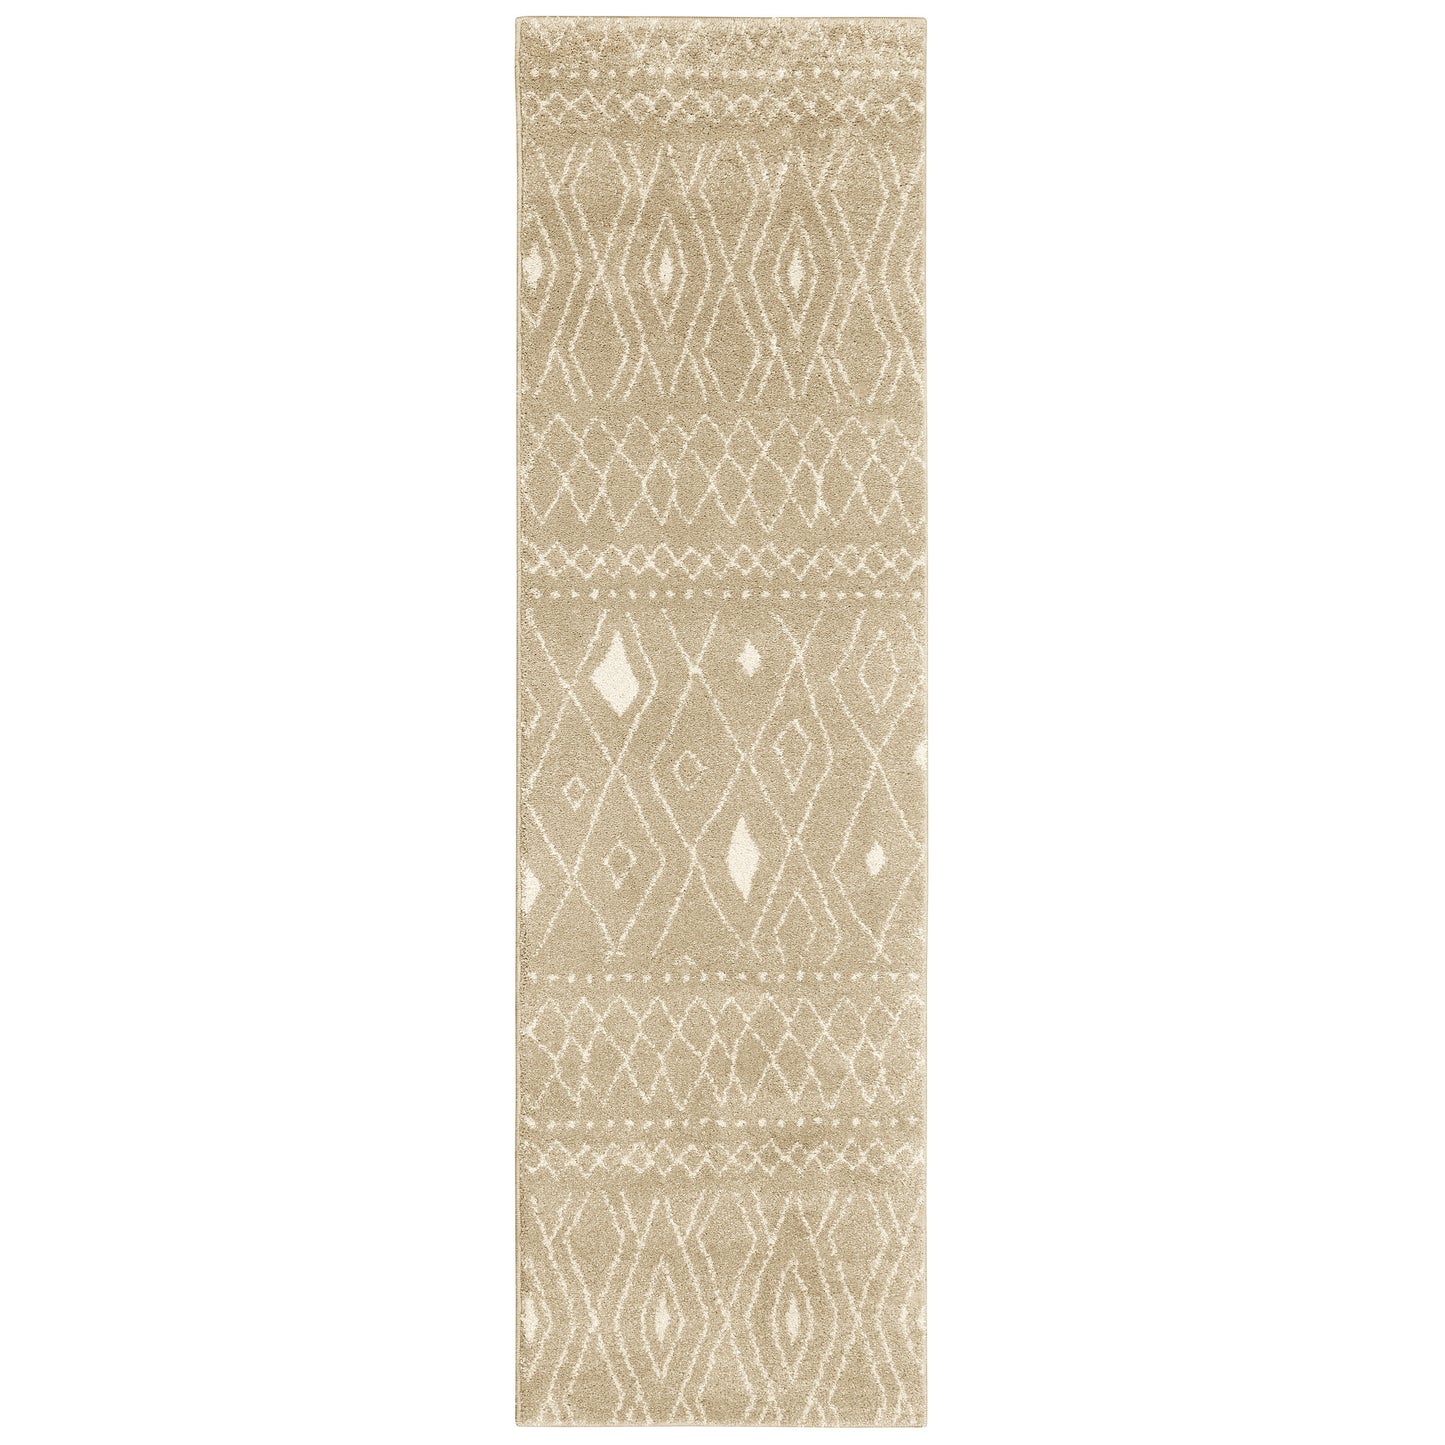 CARSON Tribal Power-Loomed Synthetic Blend Indoor Area Rug by Oriental Weavers